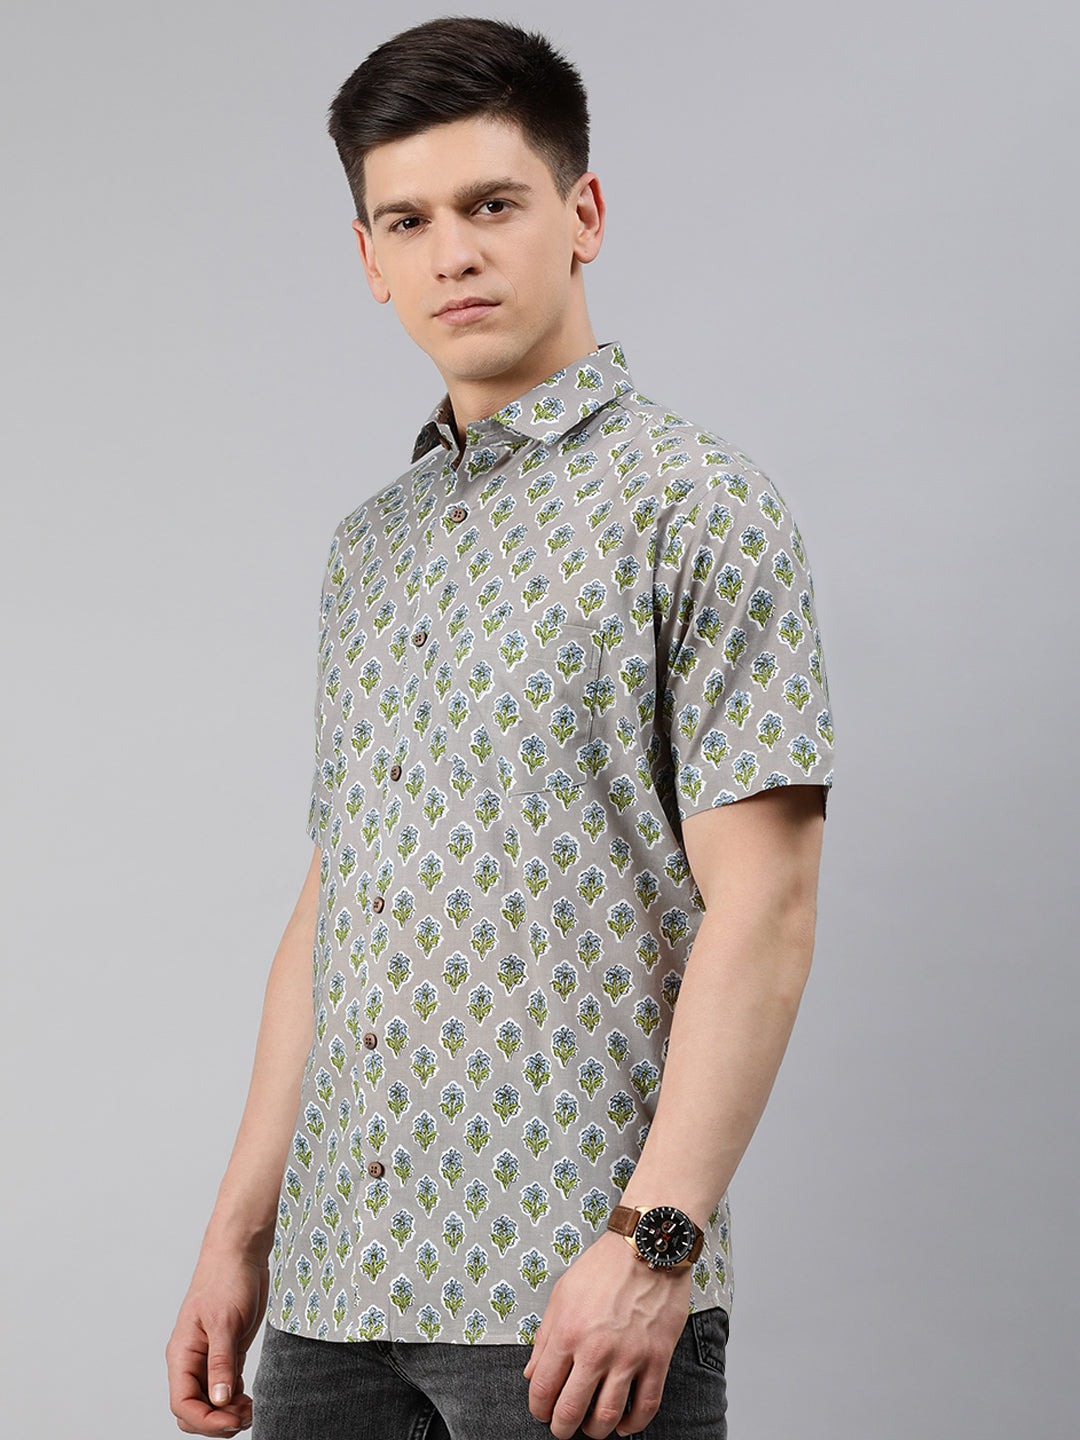 Grey Cotton Short Sleeves Shirts For Men